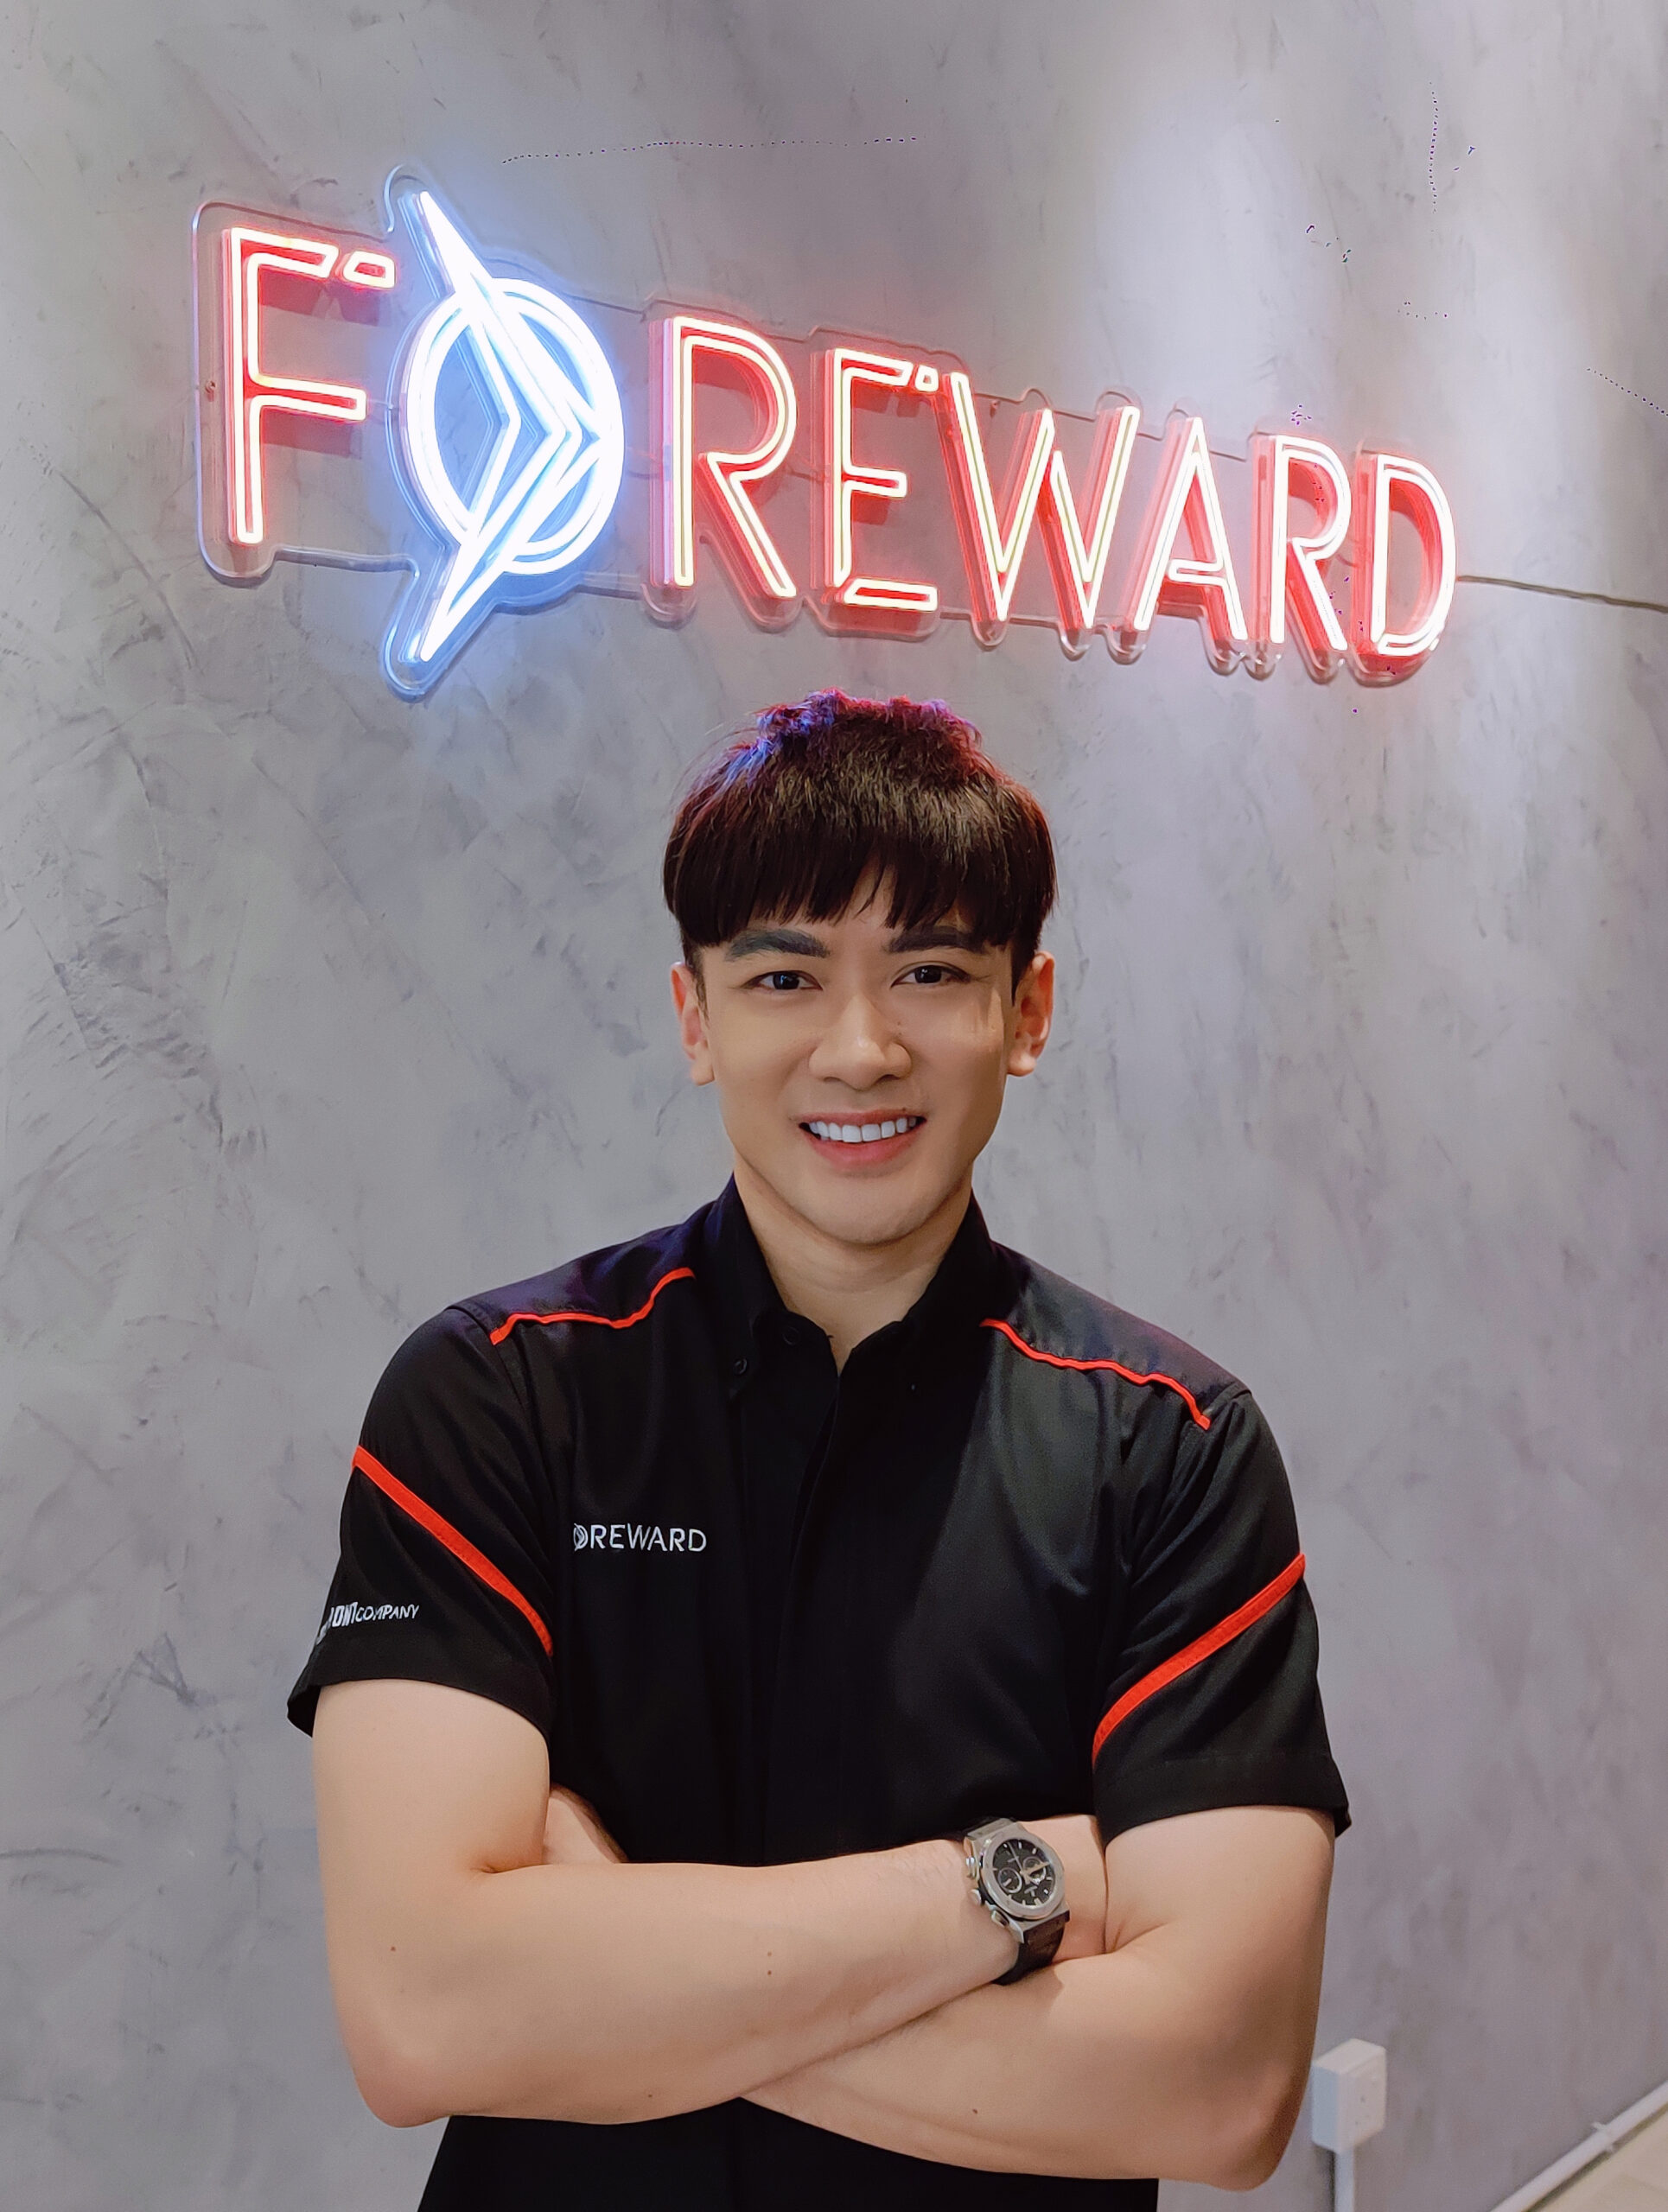 INTERVIEW RESPONSES WITH KAI SETIAWAN, CHIEF BRANDING OFFICER (CBO) OF FOREWARD REALTY